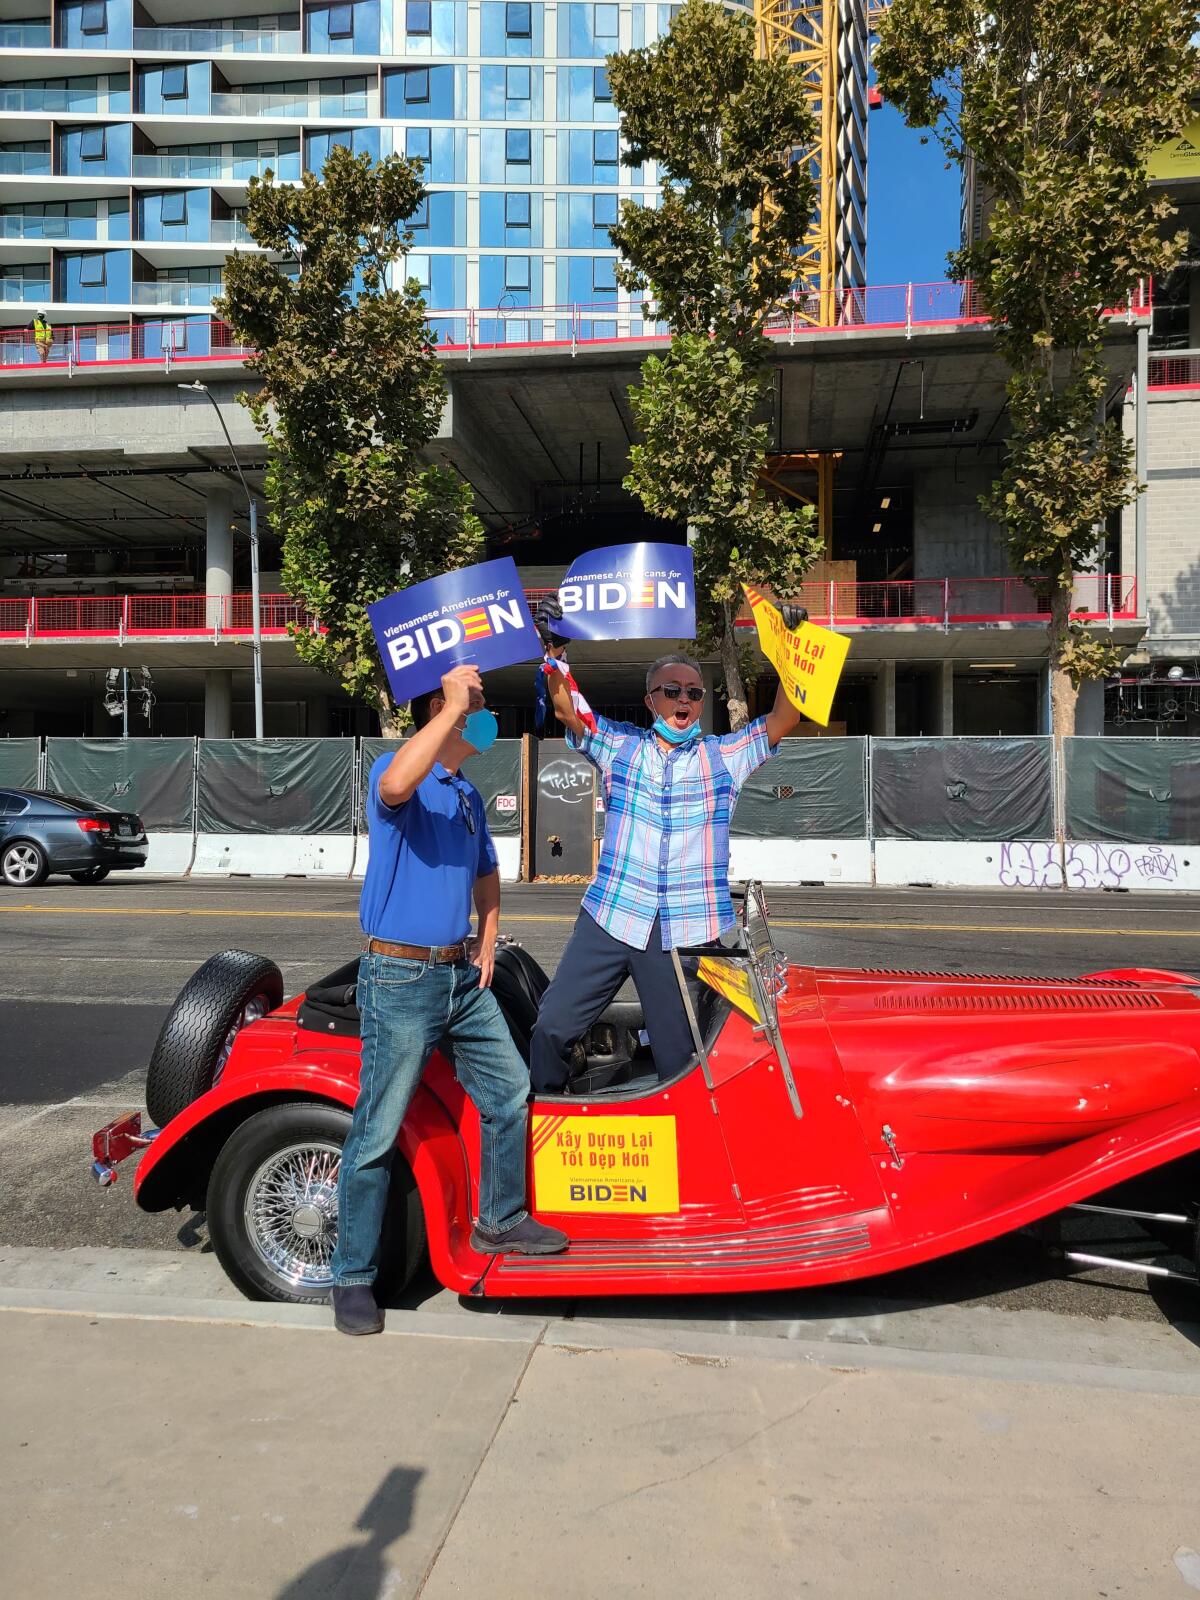 Two people with Biden signs stand next to a small, old-school red car